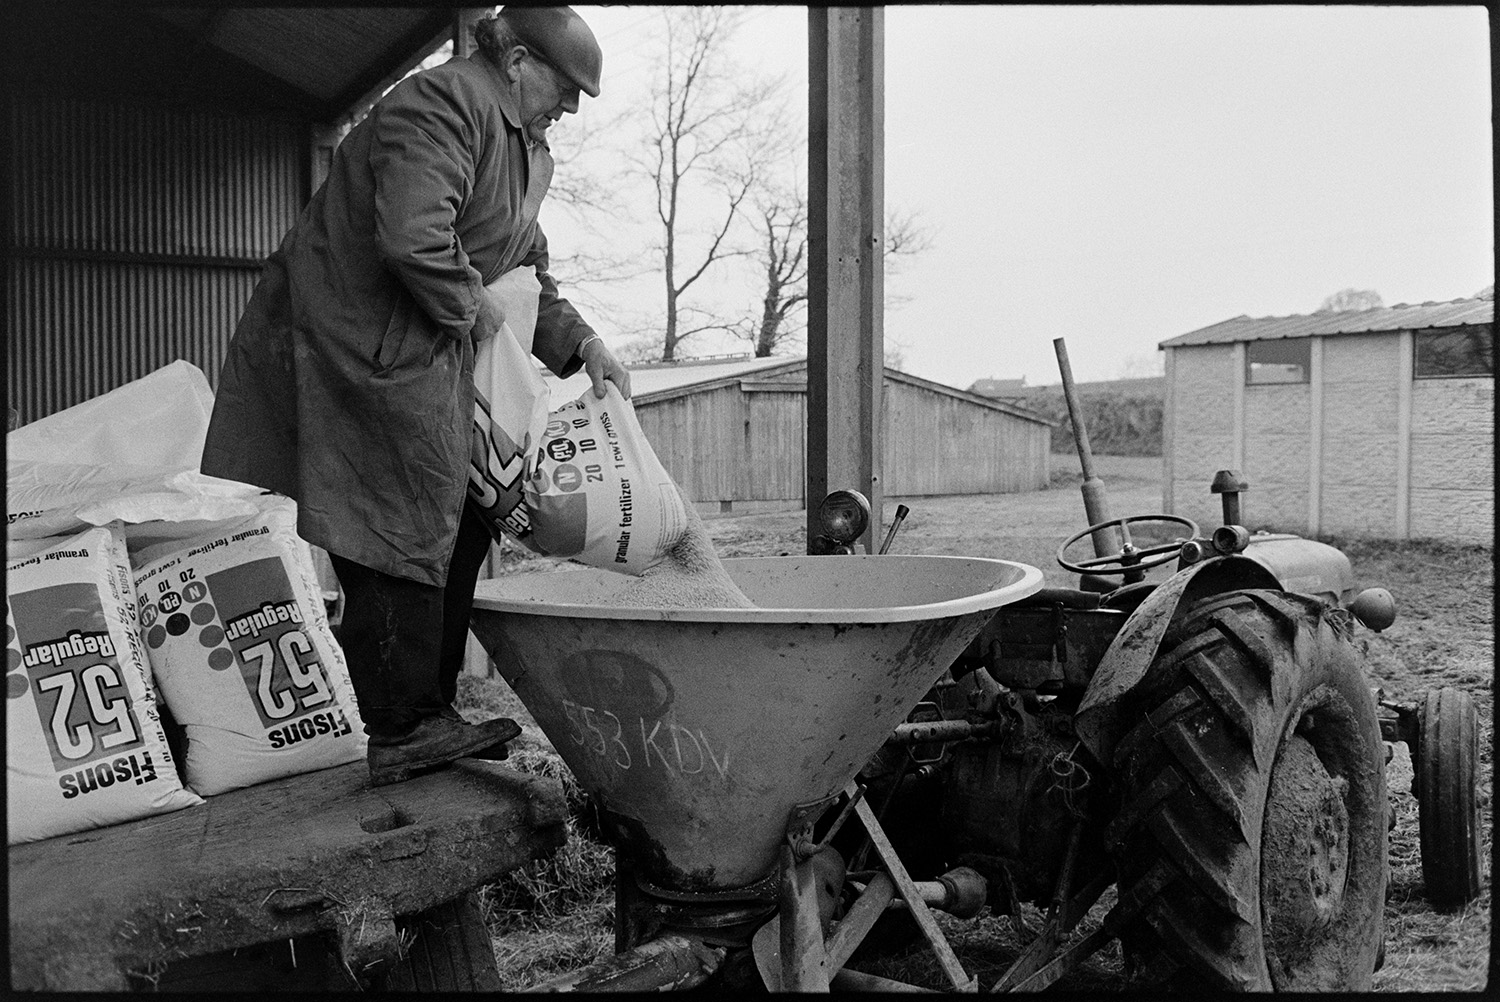 Man loading up and spreading fertilizer. 
[John Ward loading fertilizer into a funnel attached to a tractor in the farmyard, at Parsonage, Iddesleigh.]